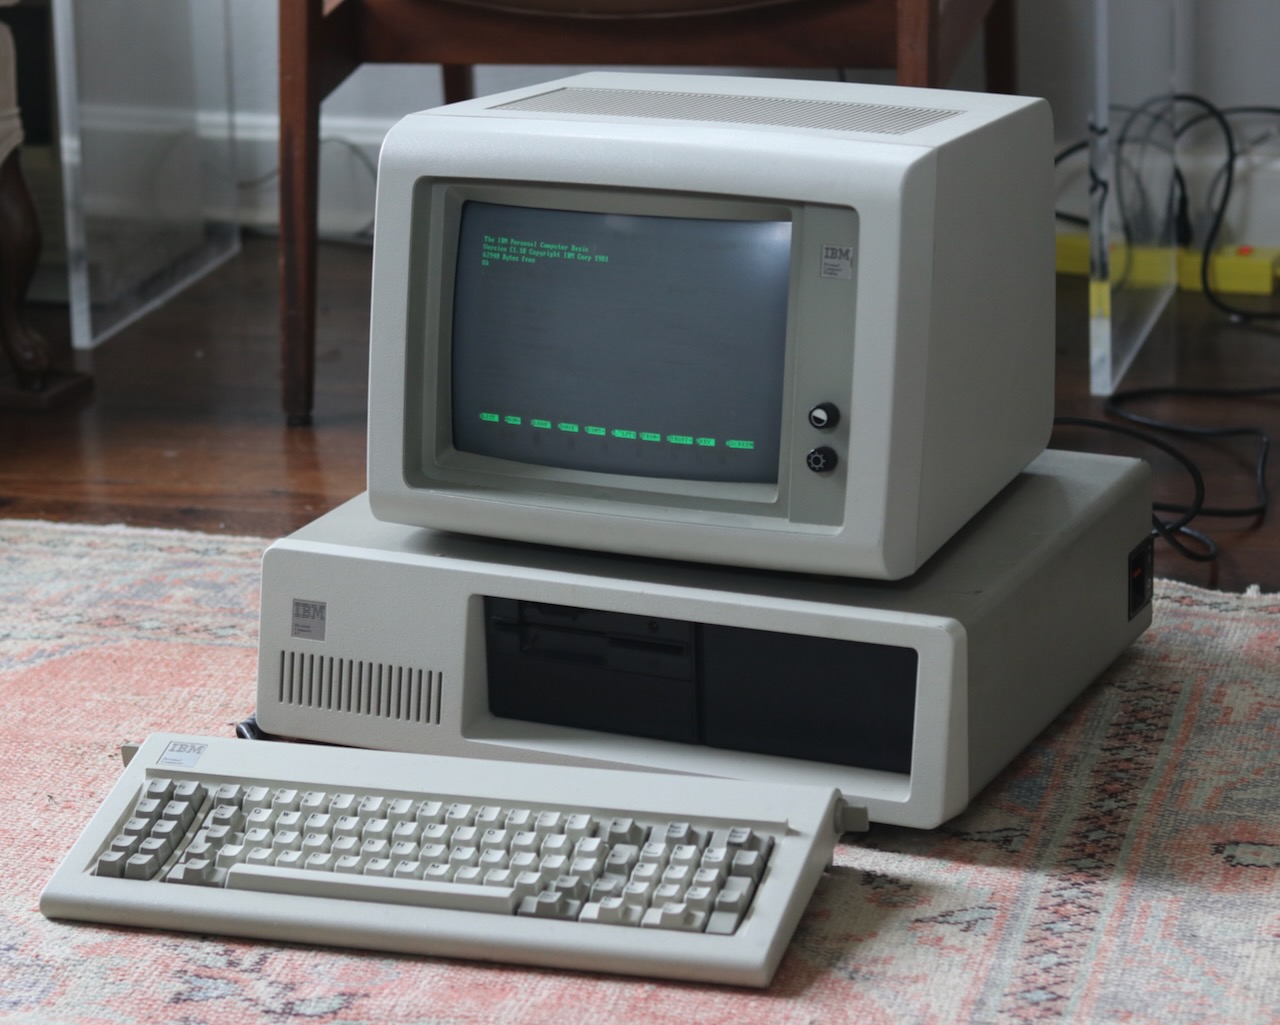 An IBM PC XT booted into ROM BASIC